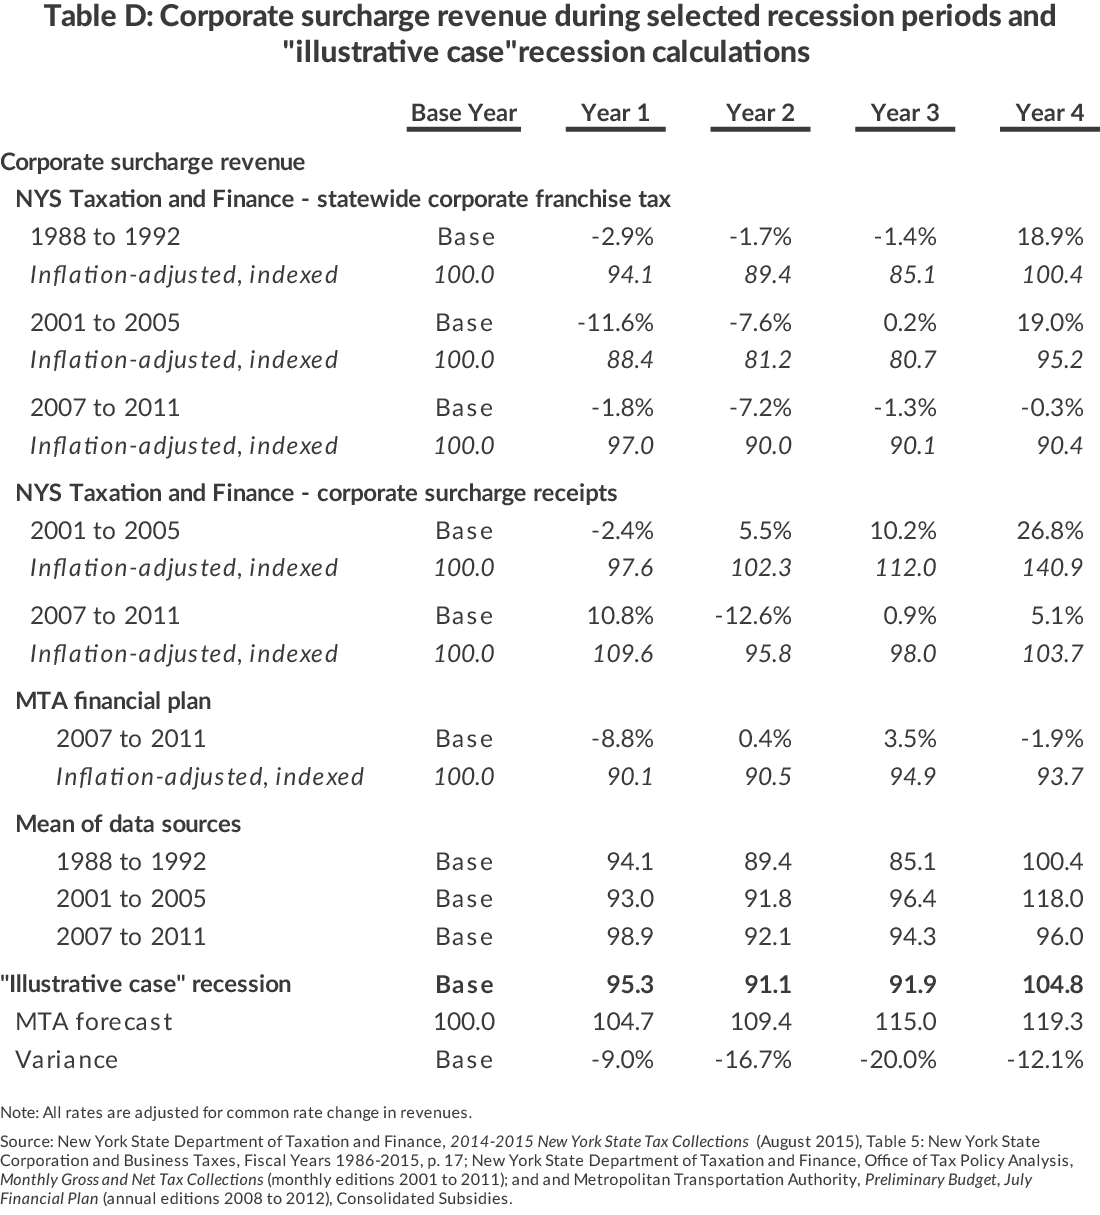 Table D: Corporate Surcharge Revenue During Selected Recession Periods and"Illustrative Case" Recession Calculations